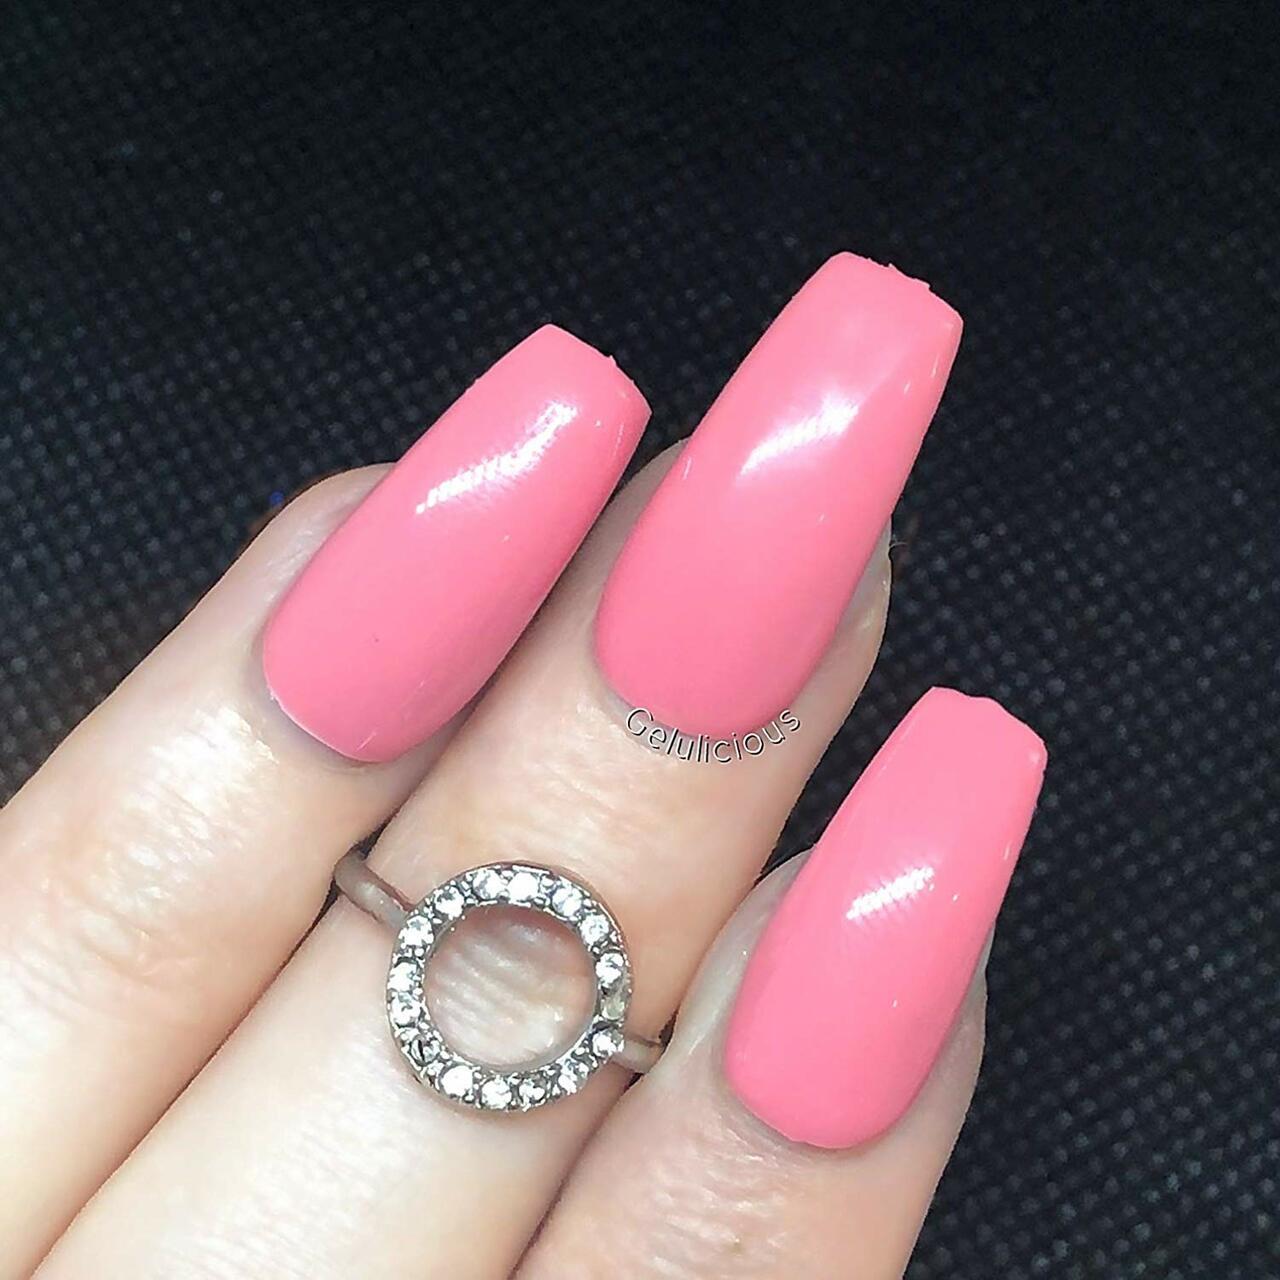 The Nail Shop - 𝐁𝐀𝐁𝐘 𝐏𝐈𝐍𝐊 𝐍𝐀𝐈𝐋𝐒 🌺 Do you think that #pink is  no longer fashionable? You are mistaken. Another shade of pink, known as  #baby_pink, is one of the most